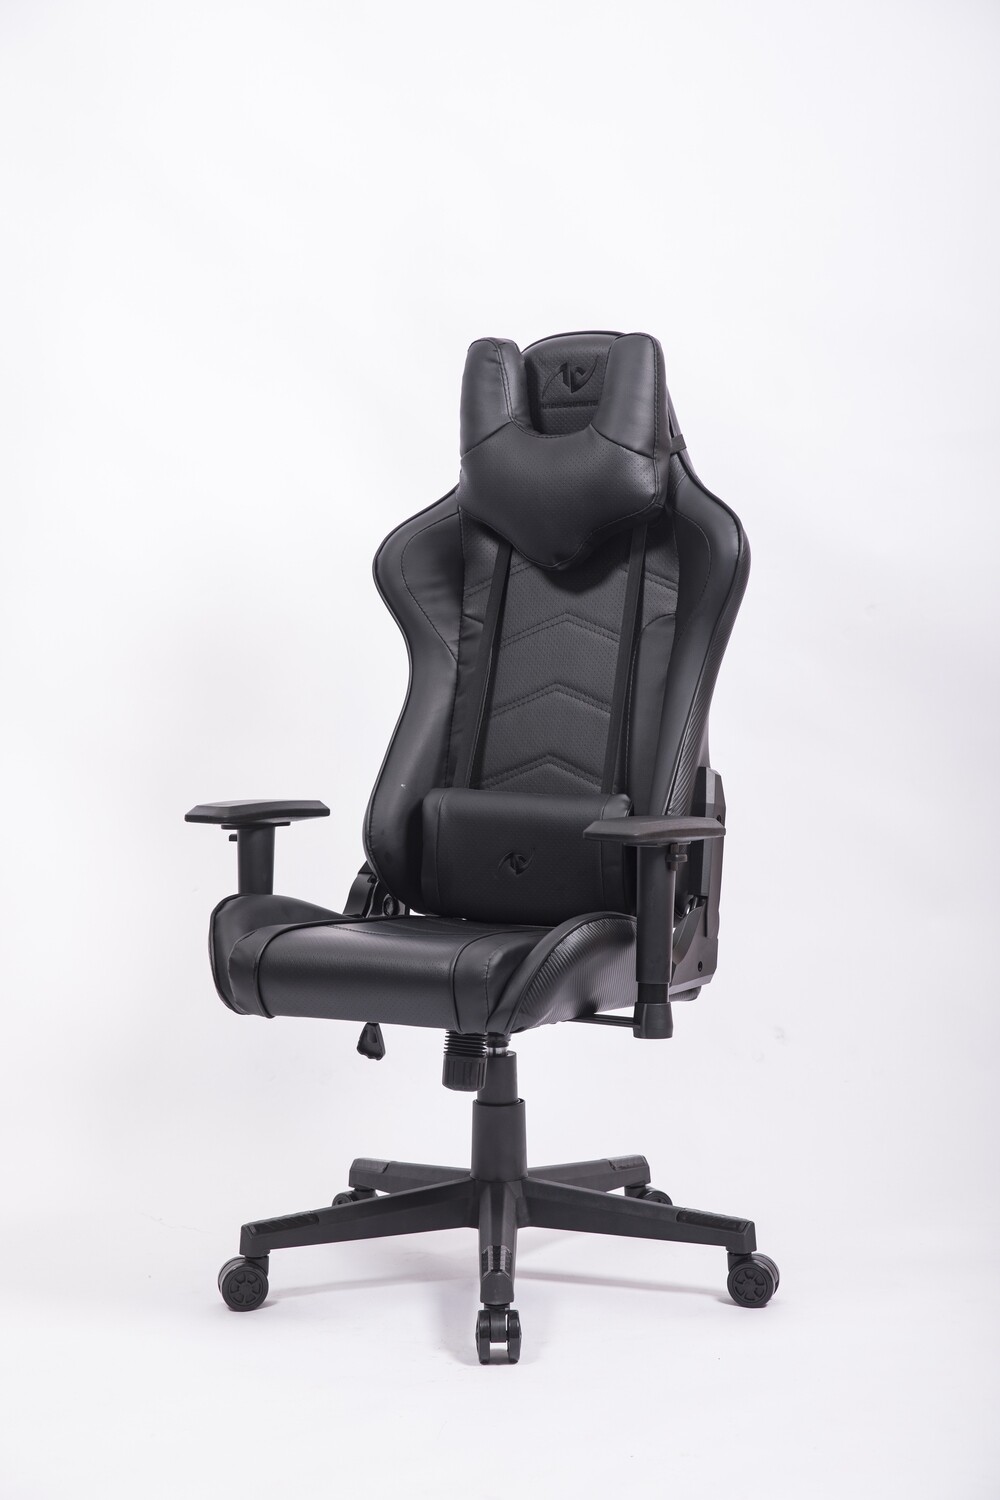 Andy Gaming Chair  Buy 2 Bundle promo , dual purpose can be use as EXECUTIVE CHAIR , assorted colors available, Limited Units only